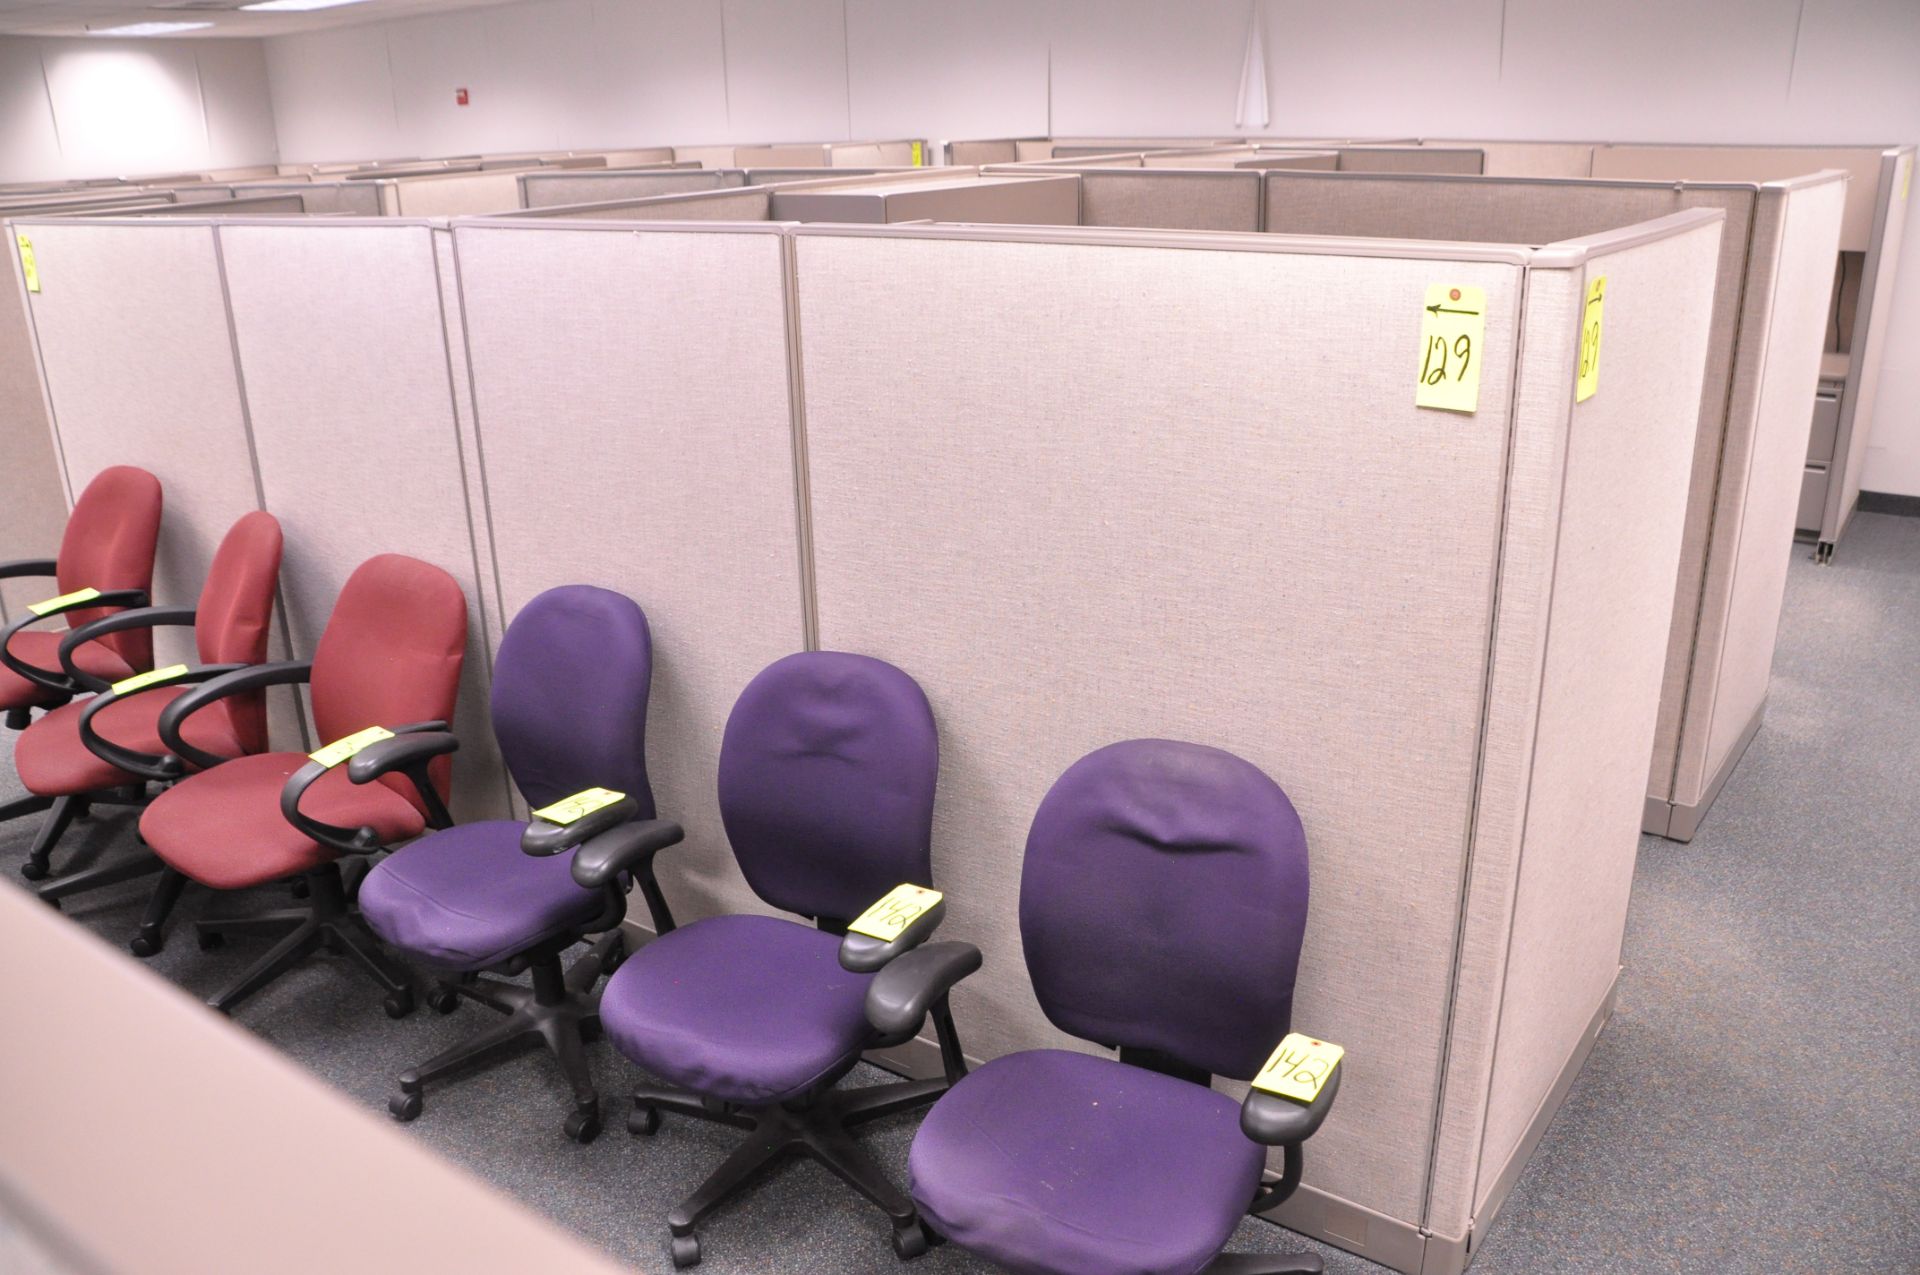 Lot-(1) 6-Station Cubicle Partition Work System with Overhead Cabinets, (No Chairs), (Located 2nd - Image 2 of 8